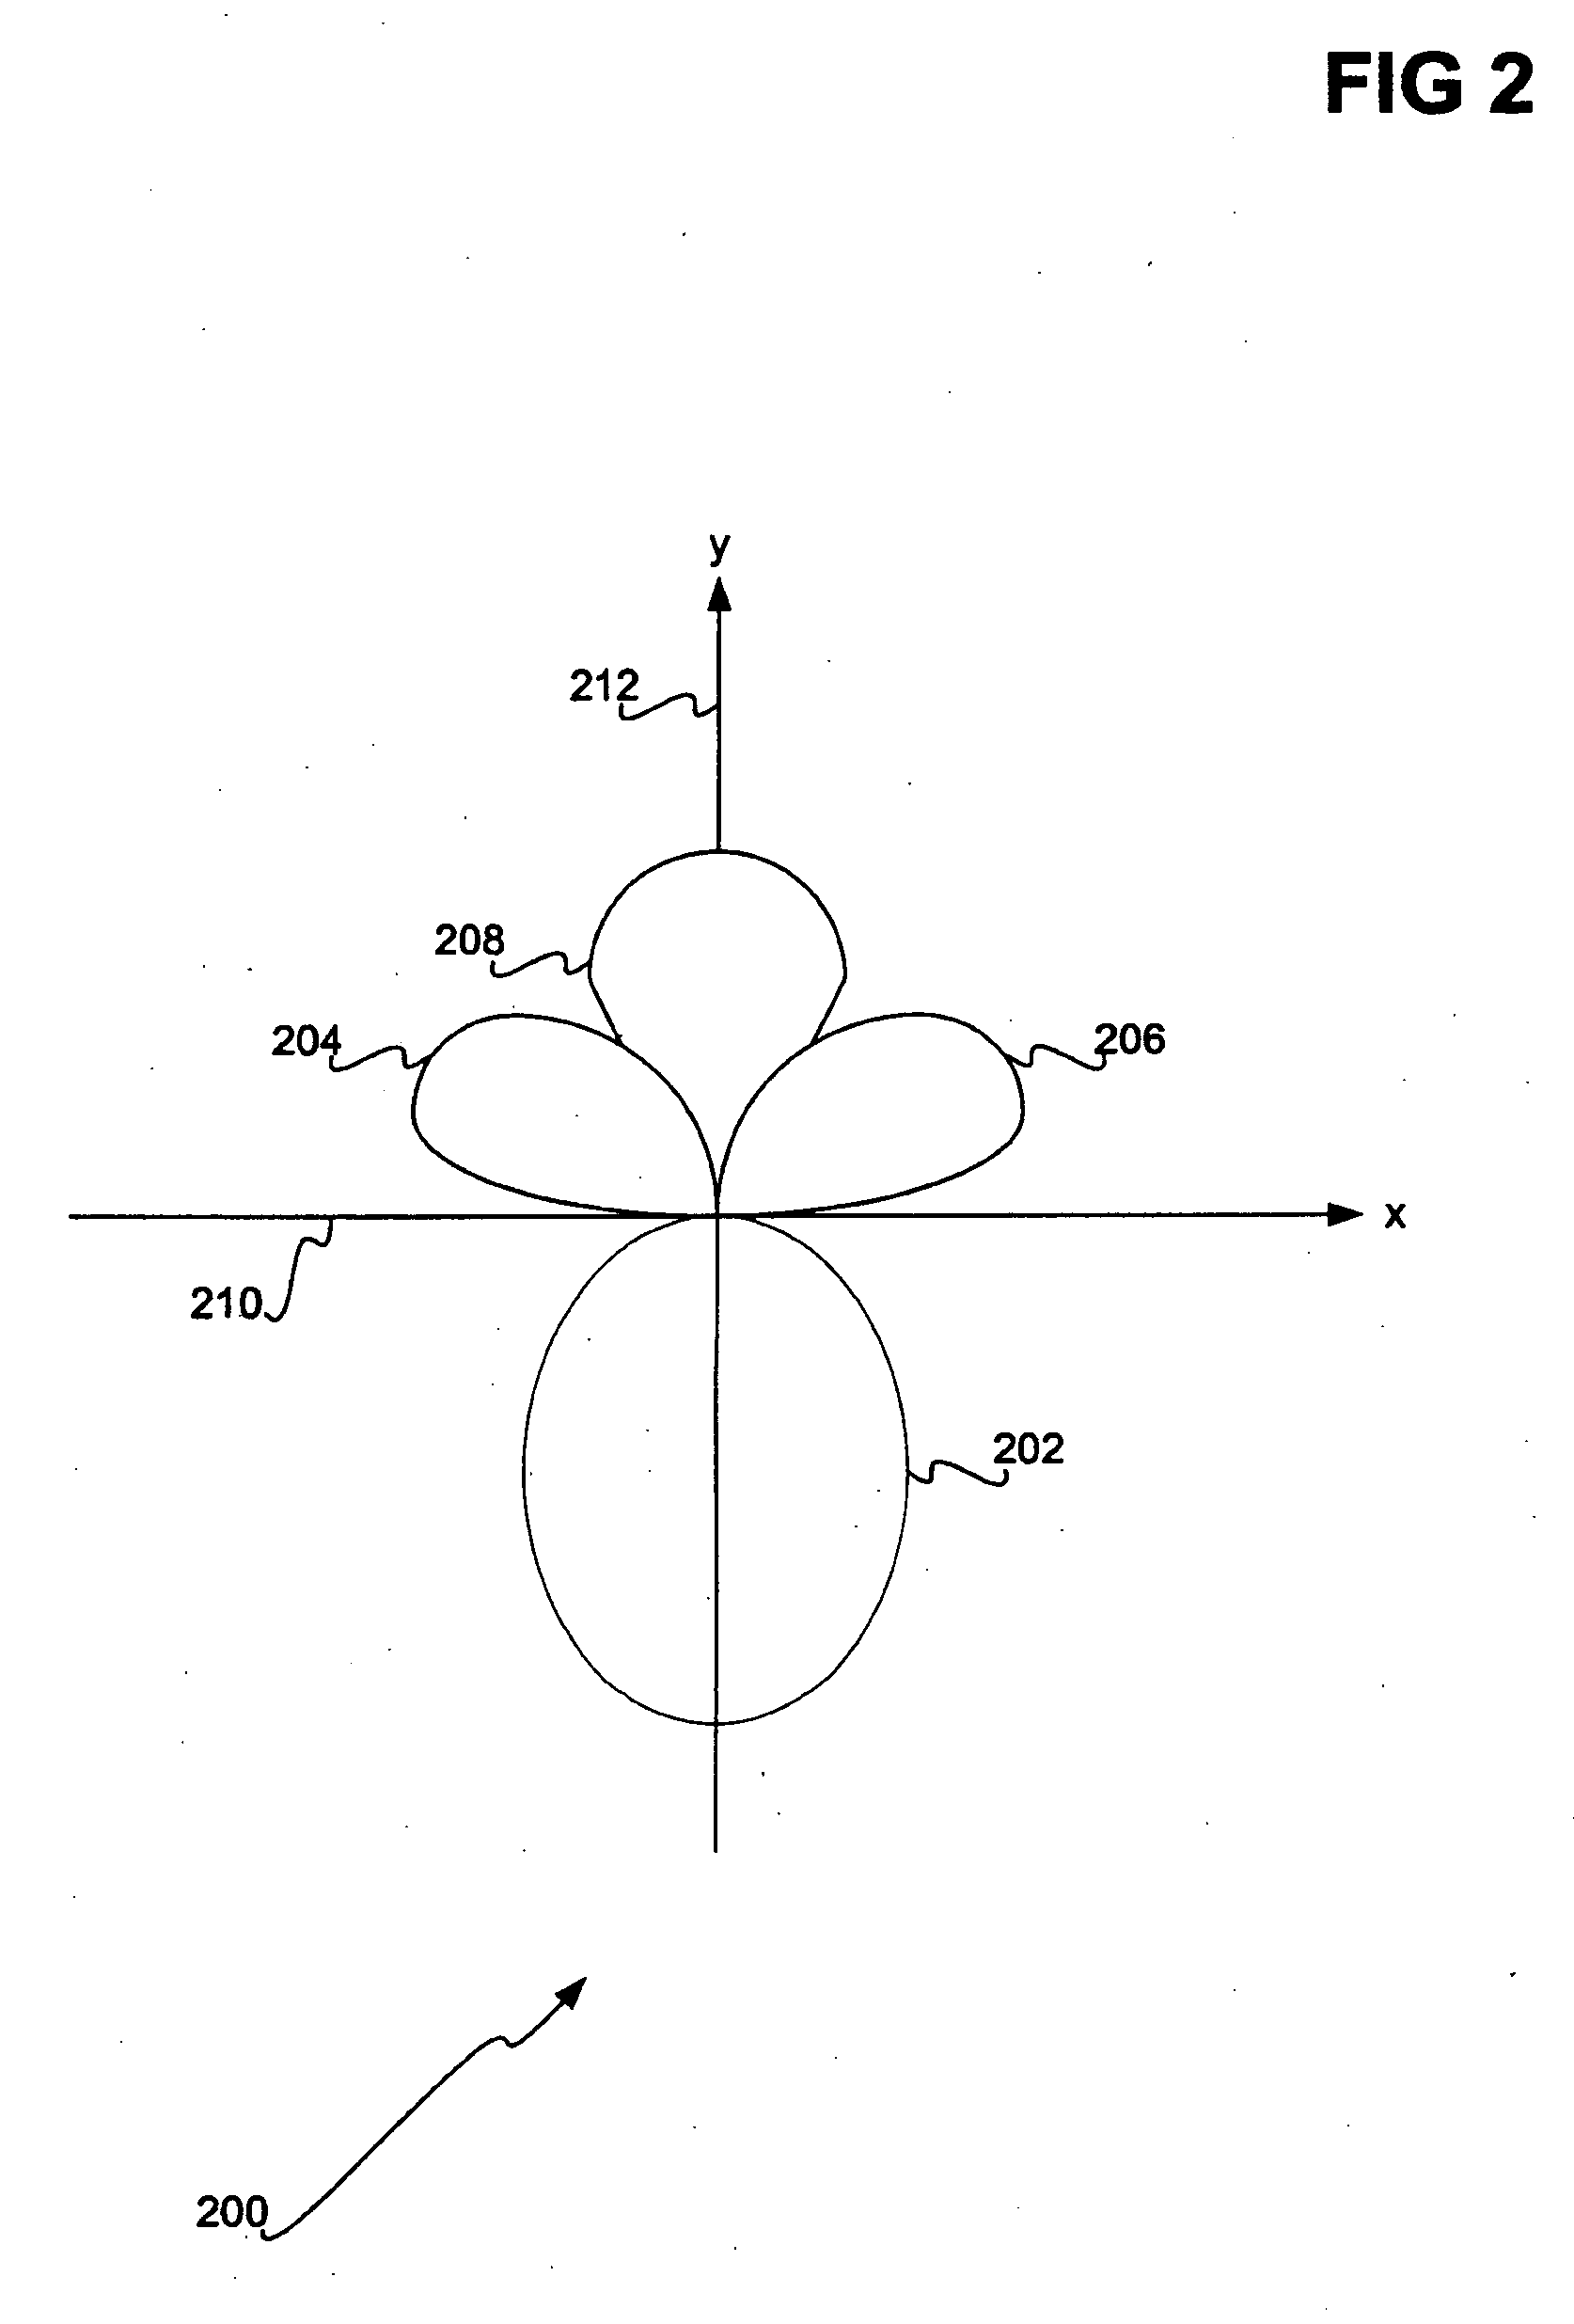 Sound source separation using convolutional mixing and a priori sound source knowledge